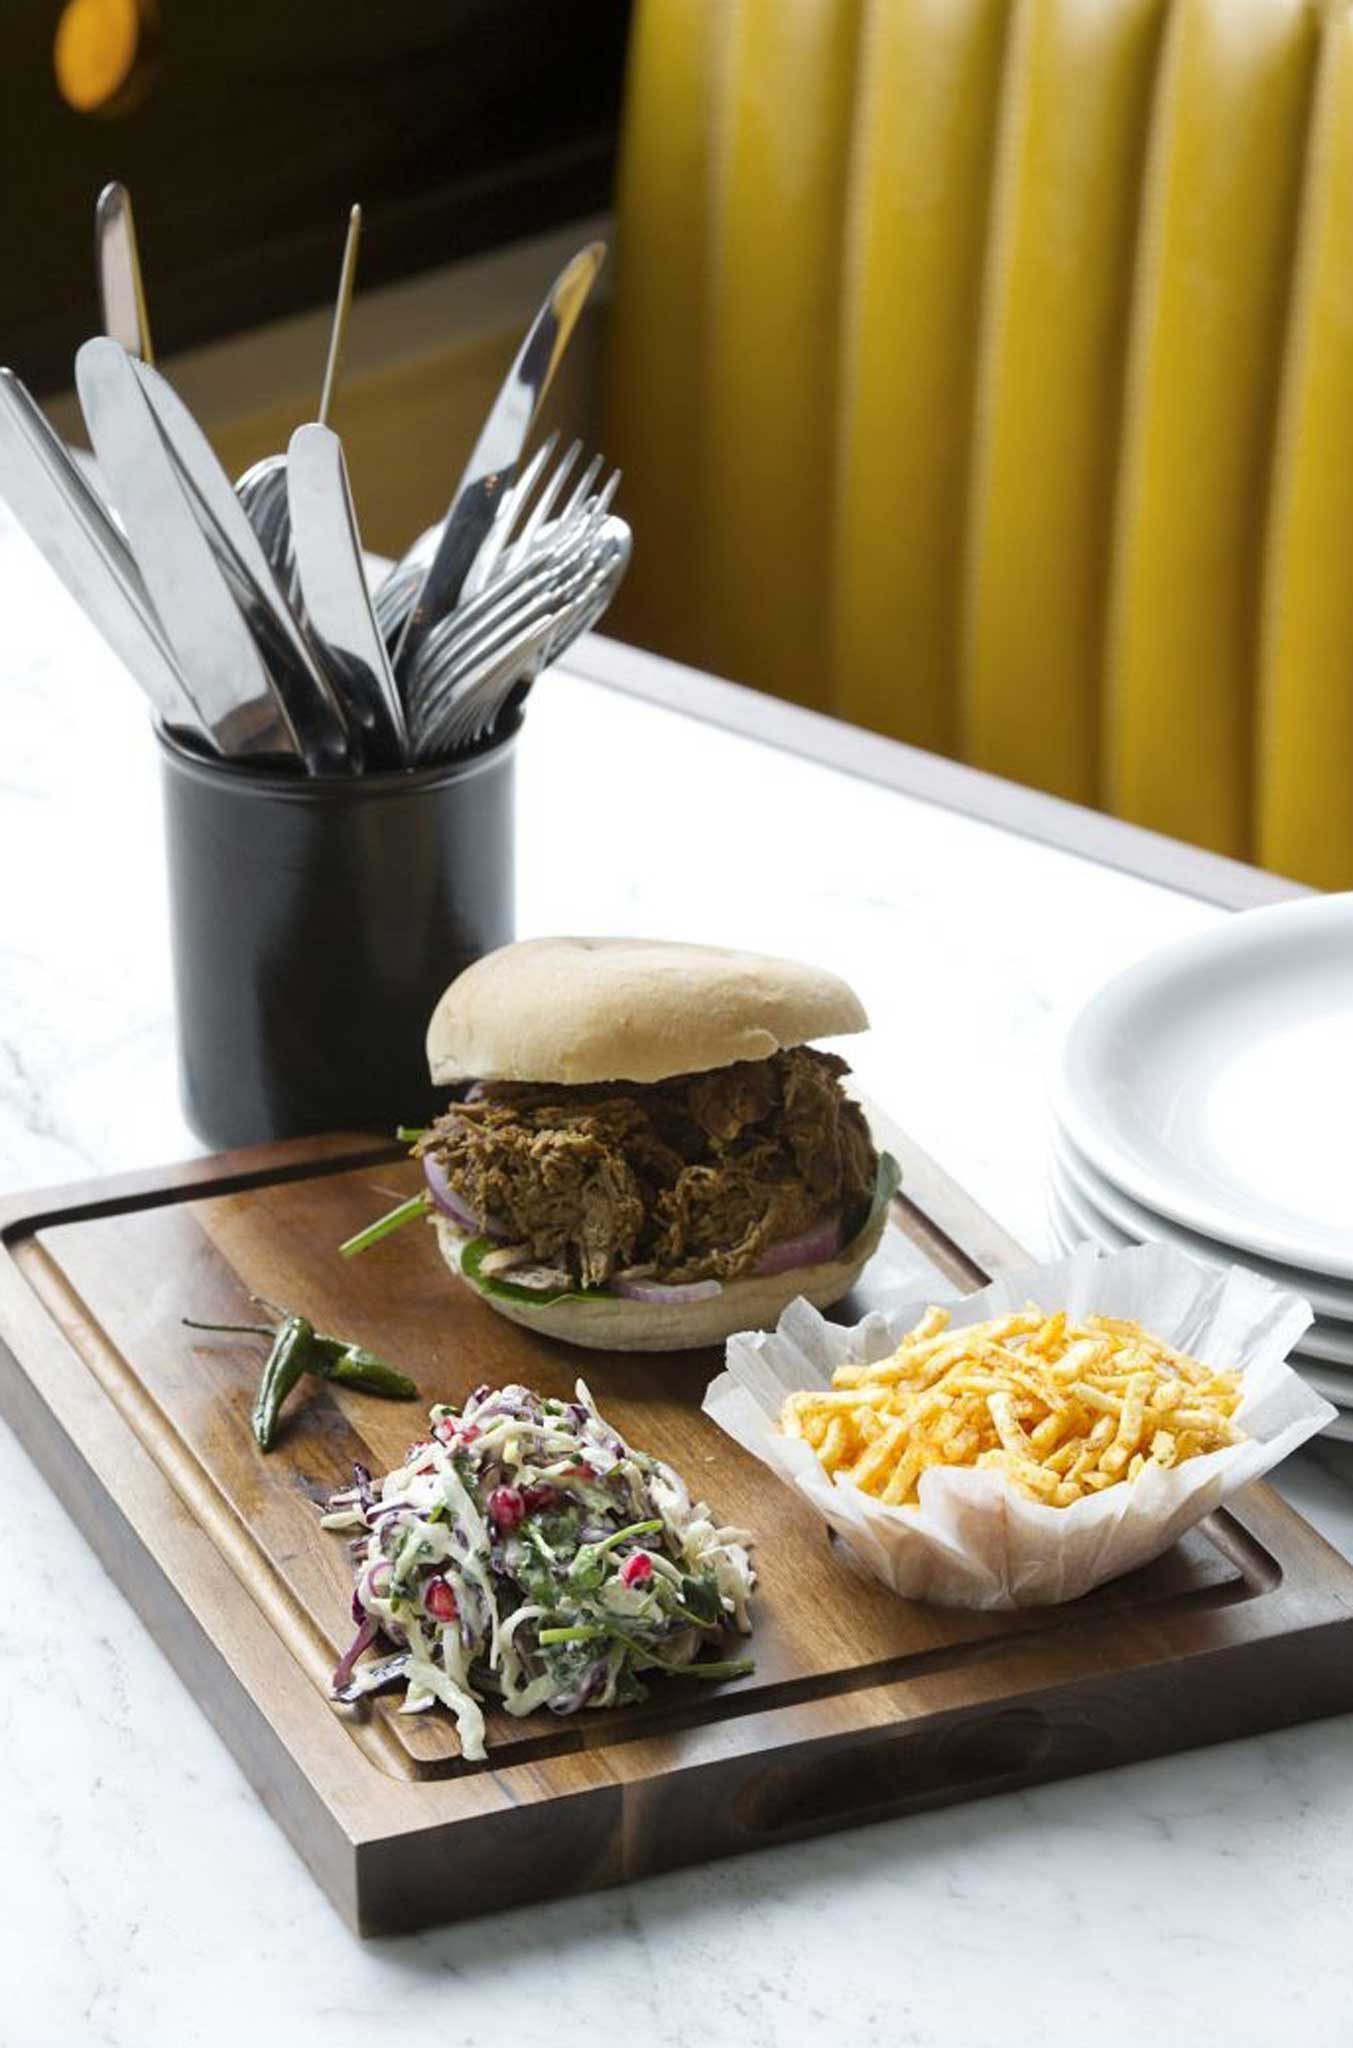 Dishoom's lamb raan bun is made from pulled lamb bursting with juices